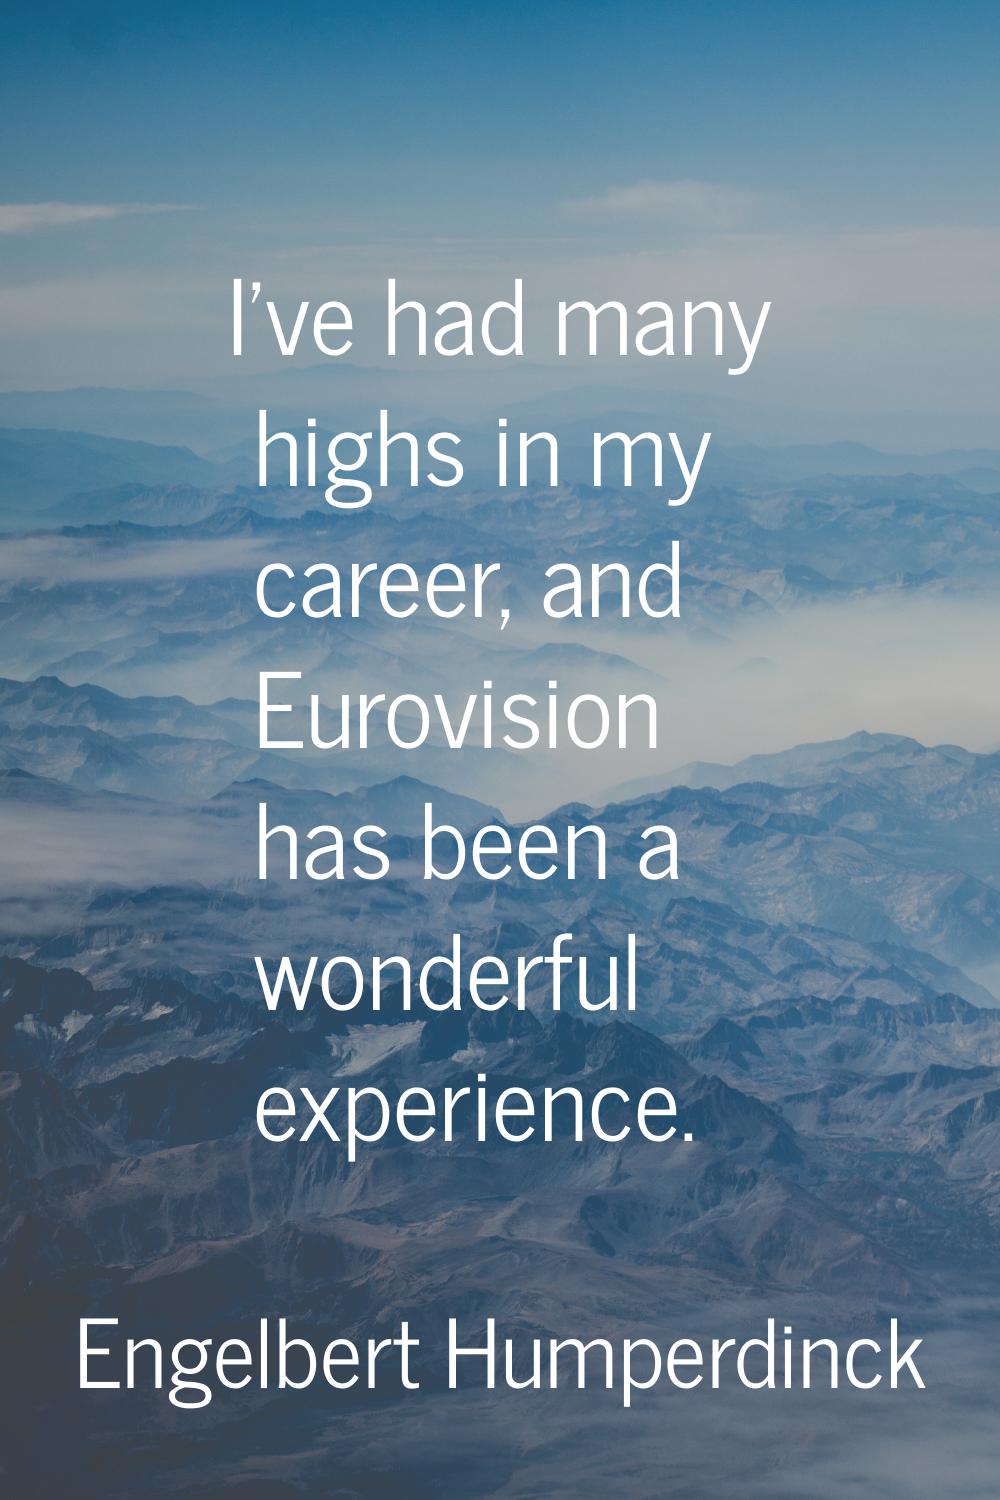 I've had many highs in my career, and Eurovision has been a wonderful experience.